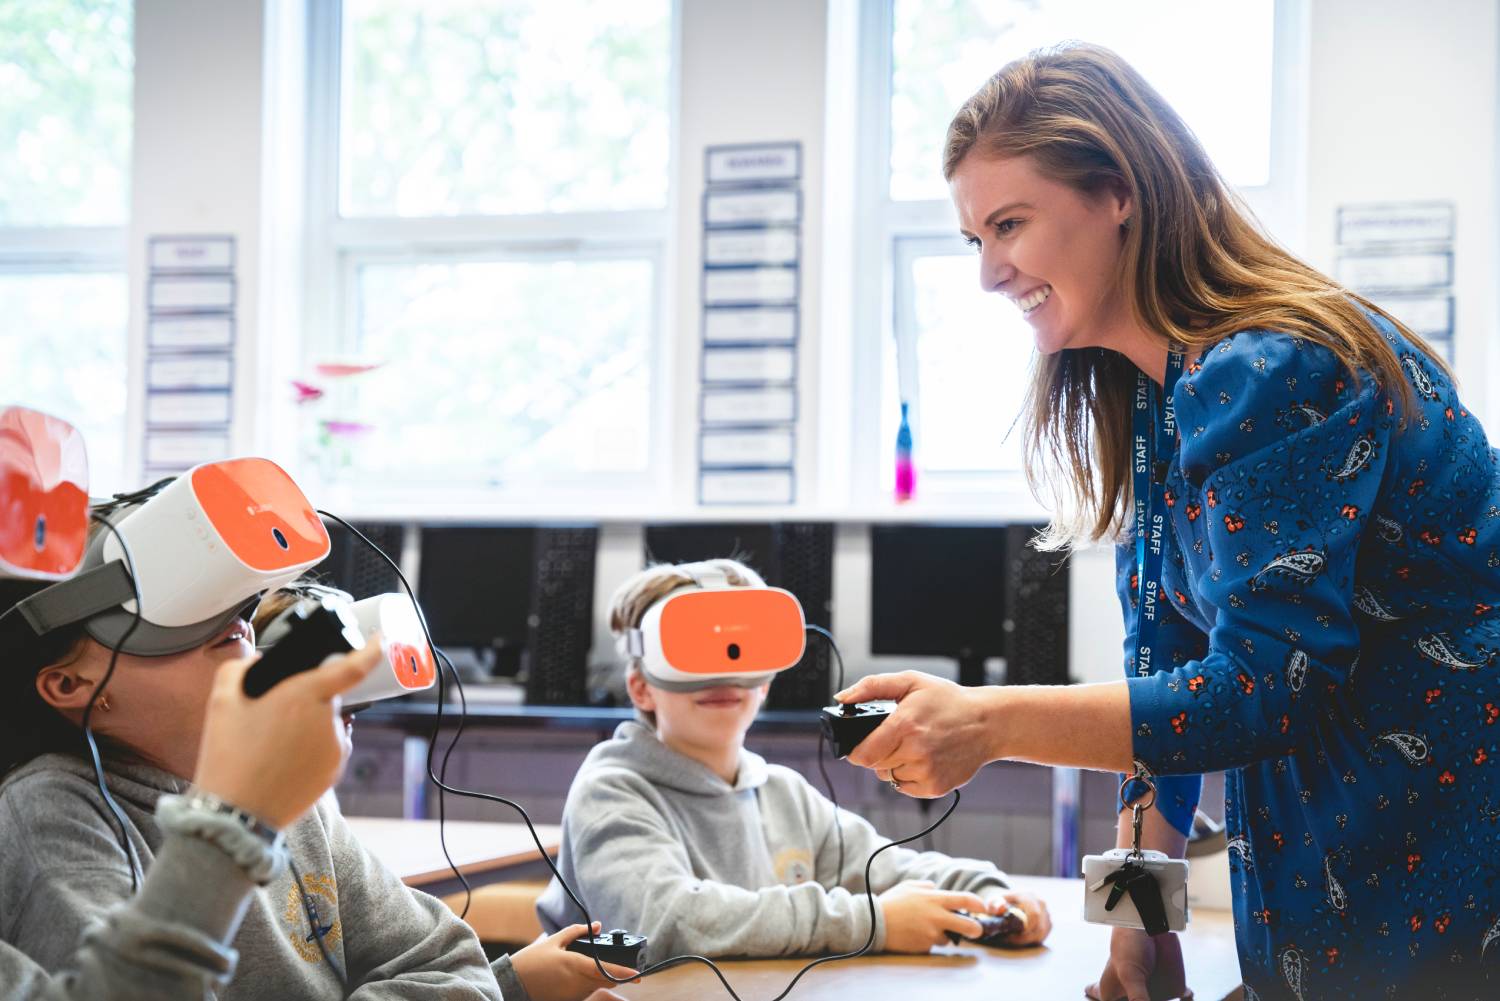 Examples of Virtual Reality in Education